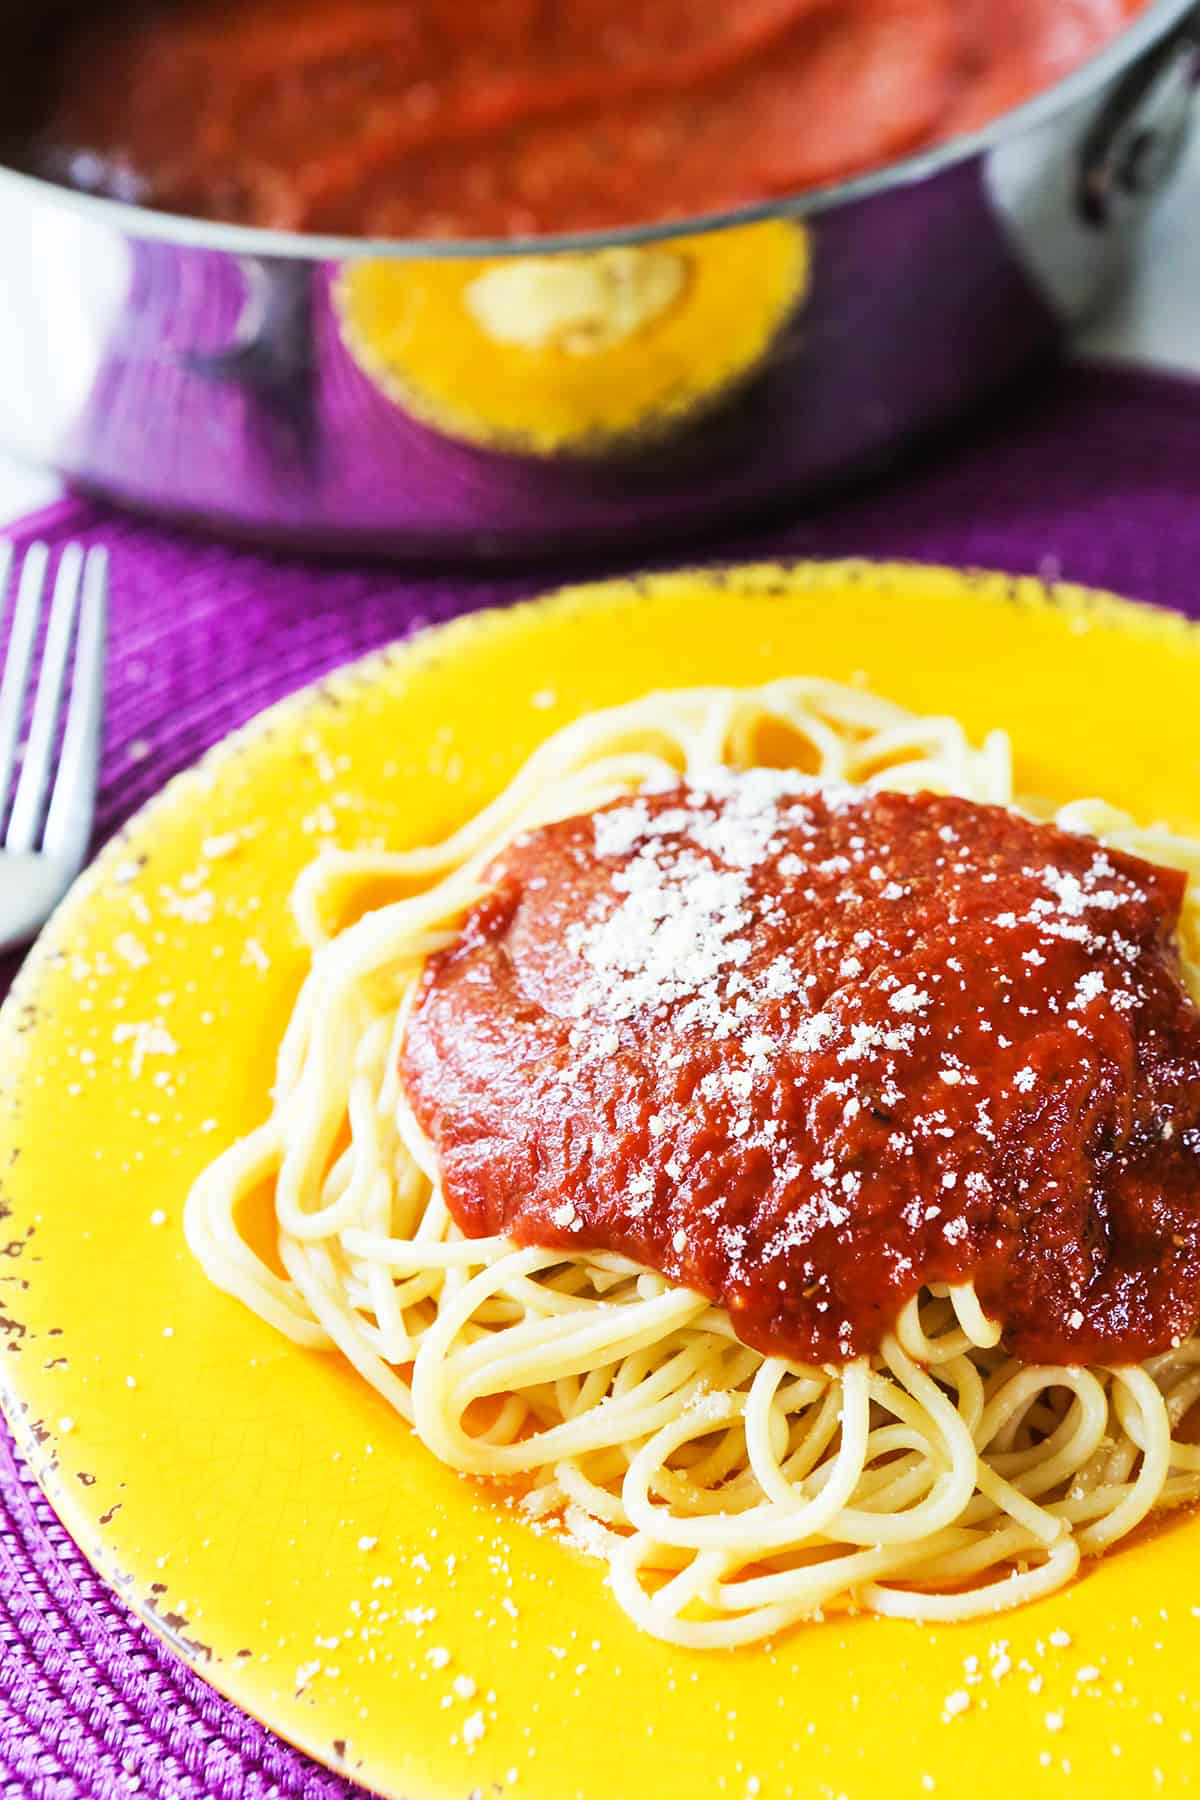 Plate of spaghetti with sauce and Parmesan cheese sprinkled on top.